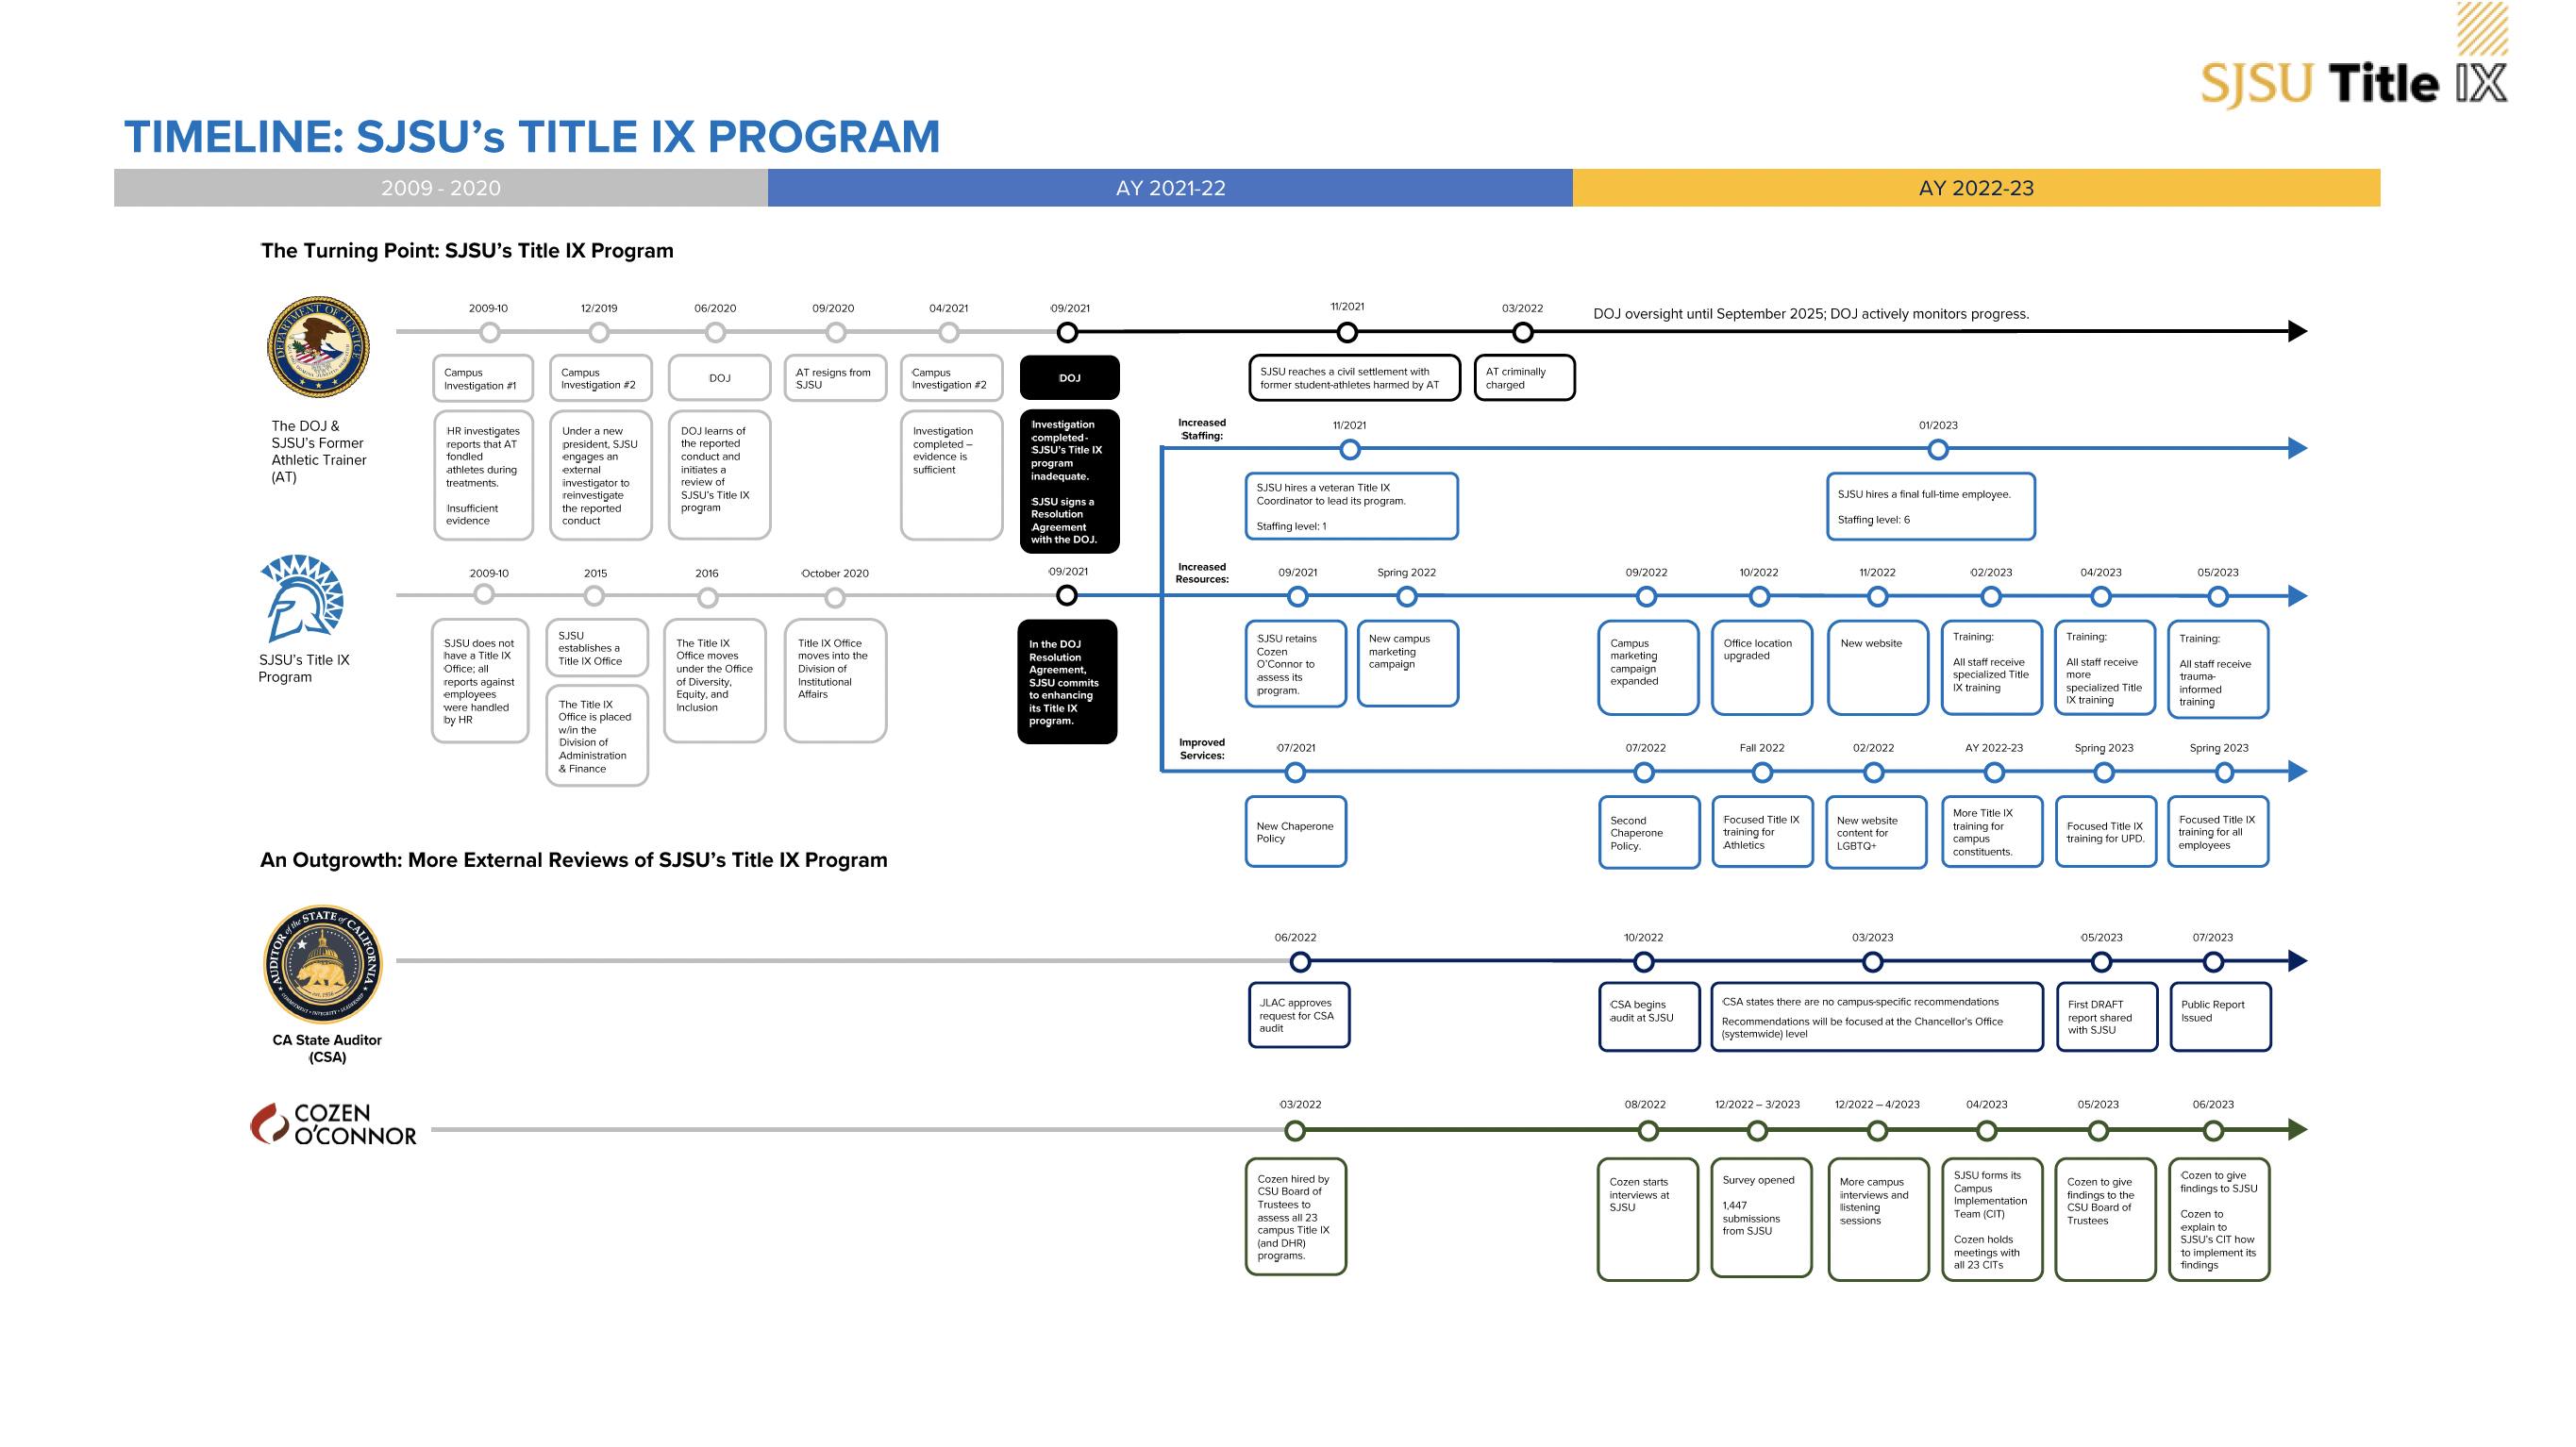 Timeline produced by Title IX from 2009-2023